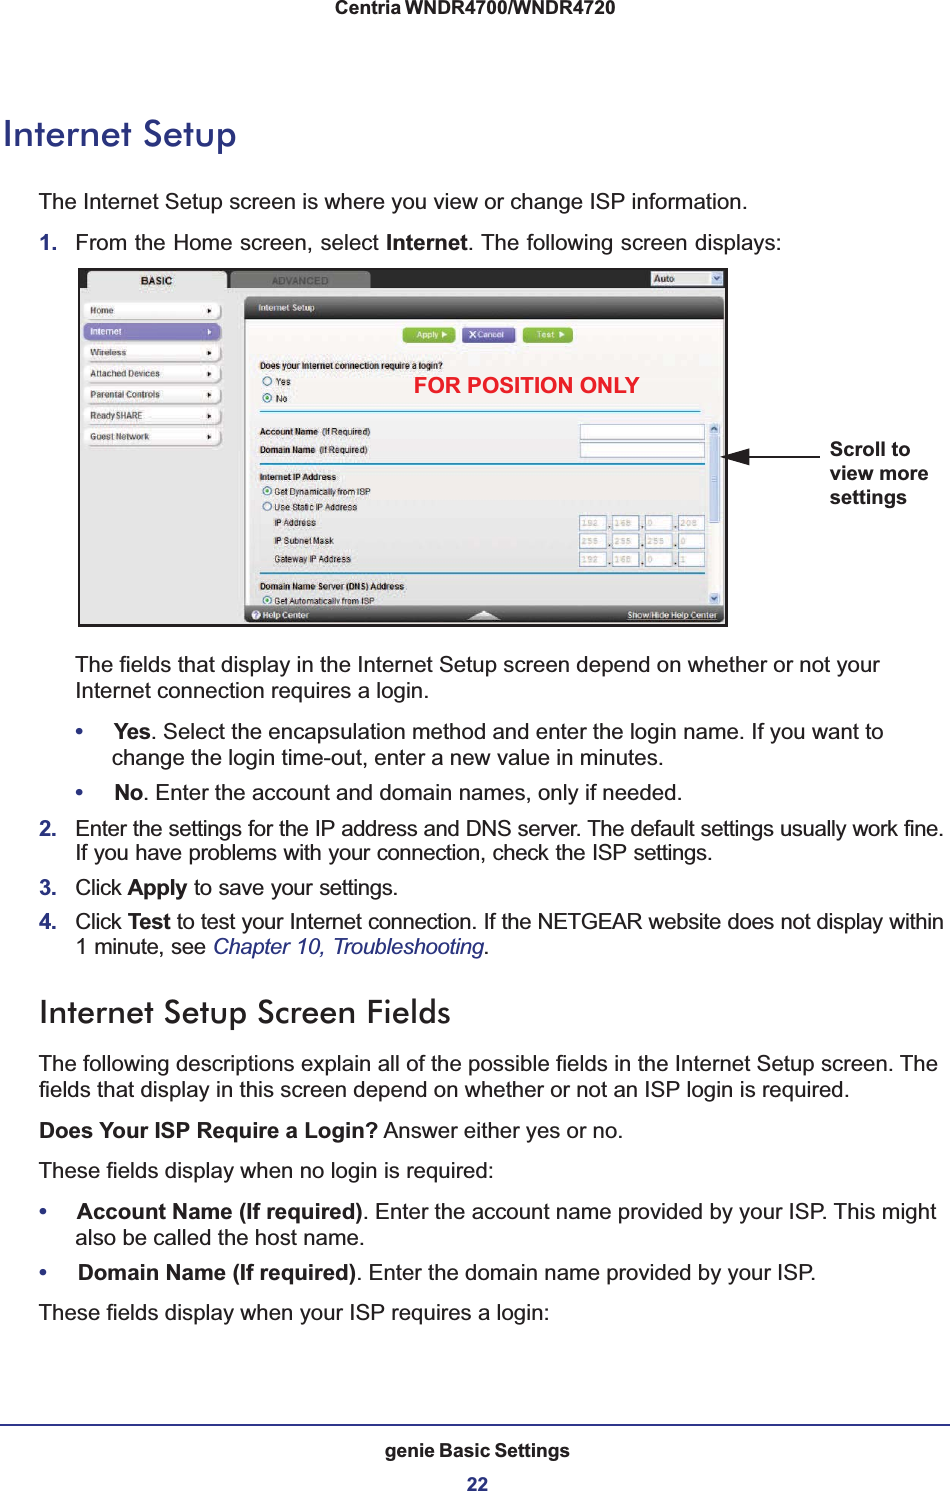 genie Basic Settings22Centria WNDR4700/WNDR4720 Internet SetupThe Internet Setup screen is where you view or change ISP information. 1. From the Home screen, select Internet. The following screen displays:Scroll to view more settingsFOR POSITION ONLYThe fields that display in the Internet Setup screen depend on whether or not your Internet connection requires a login.•Yes. Select the encapsulation method and enter the login name. If you want to change the login time-out, enter a new value in minutes.•No. Enter the account and domain names, only if needed.2. Enter the settings for the IP address and DNS server. The default settings usually work fine. If you have problems with your connection, check the ISP settings.3. Click Apply to save your settings.4. Click Test to test your Internet connection. If the NETGEAR website does not display within 1 minute, see Chapter 10, Troubleshooting.Internet Setup Screen FieldsThe following descriptions explain all of the possible fields in the Internet Setup screen. The fields that display in this screen depend on whether or not an ISP login is required.Does Your ISP Require a Login? Answer either yes or no.These fields display when no login is required:•Account Name (If required). Enter the account name provided by your ISP. This might also be called the host name.•Domain Name (If required). Enter the domain name provided by your ISP.These fields display when your ISP requires a login: